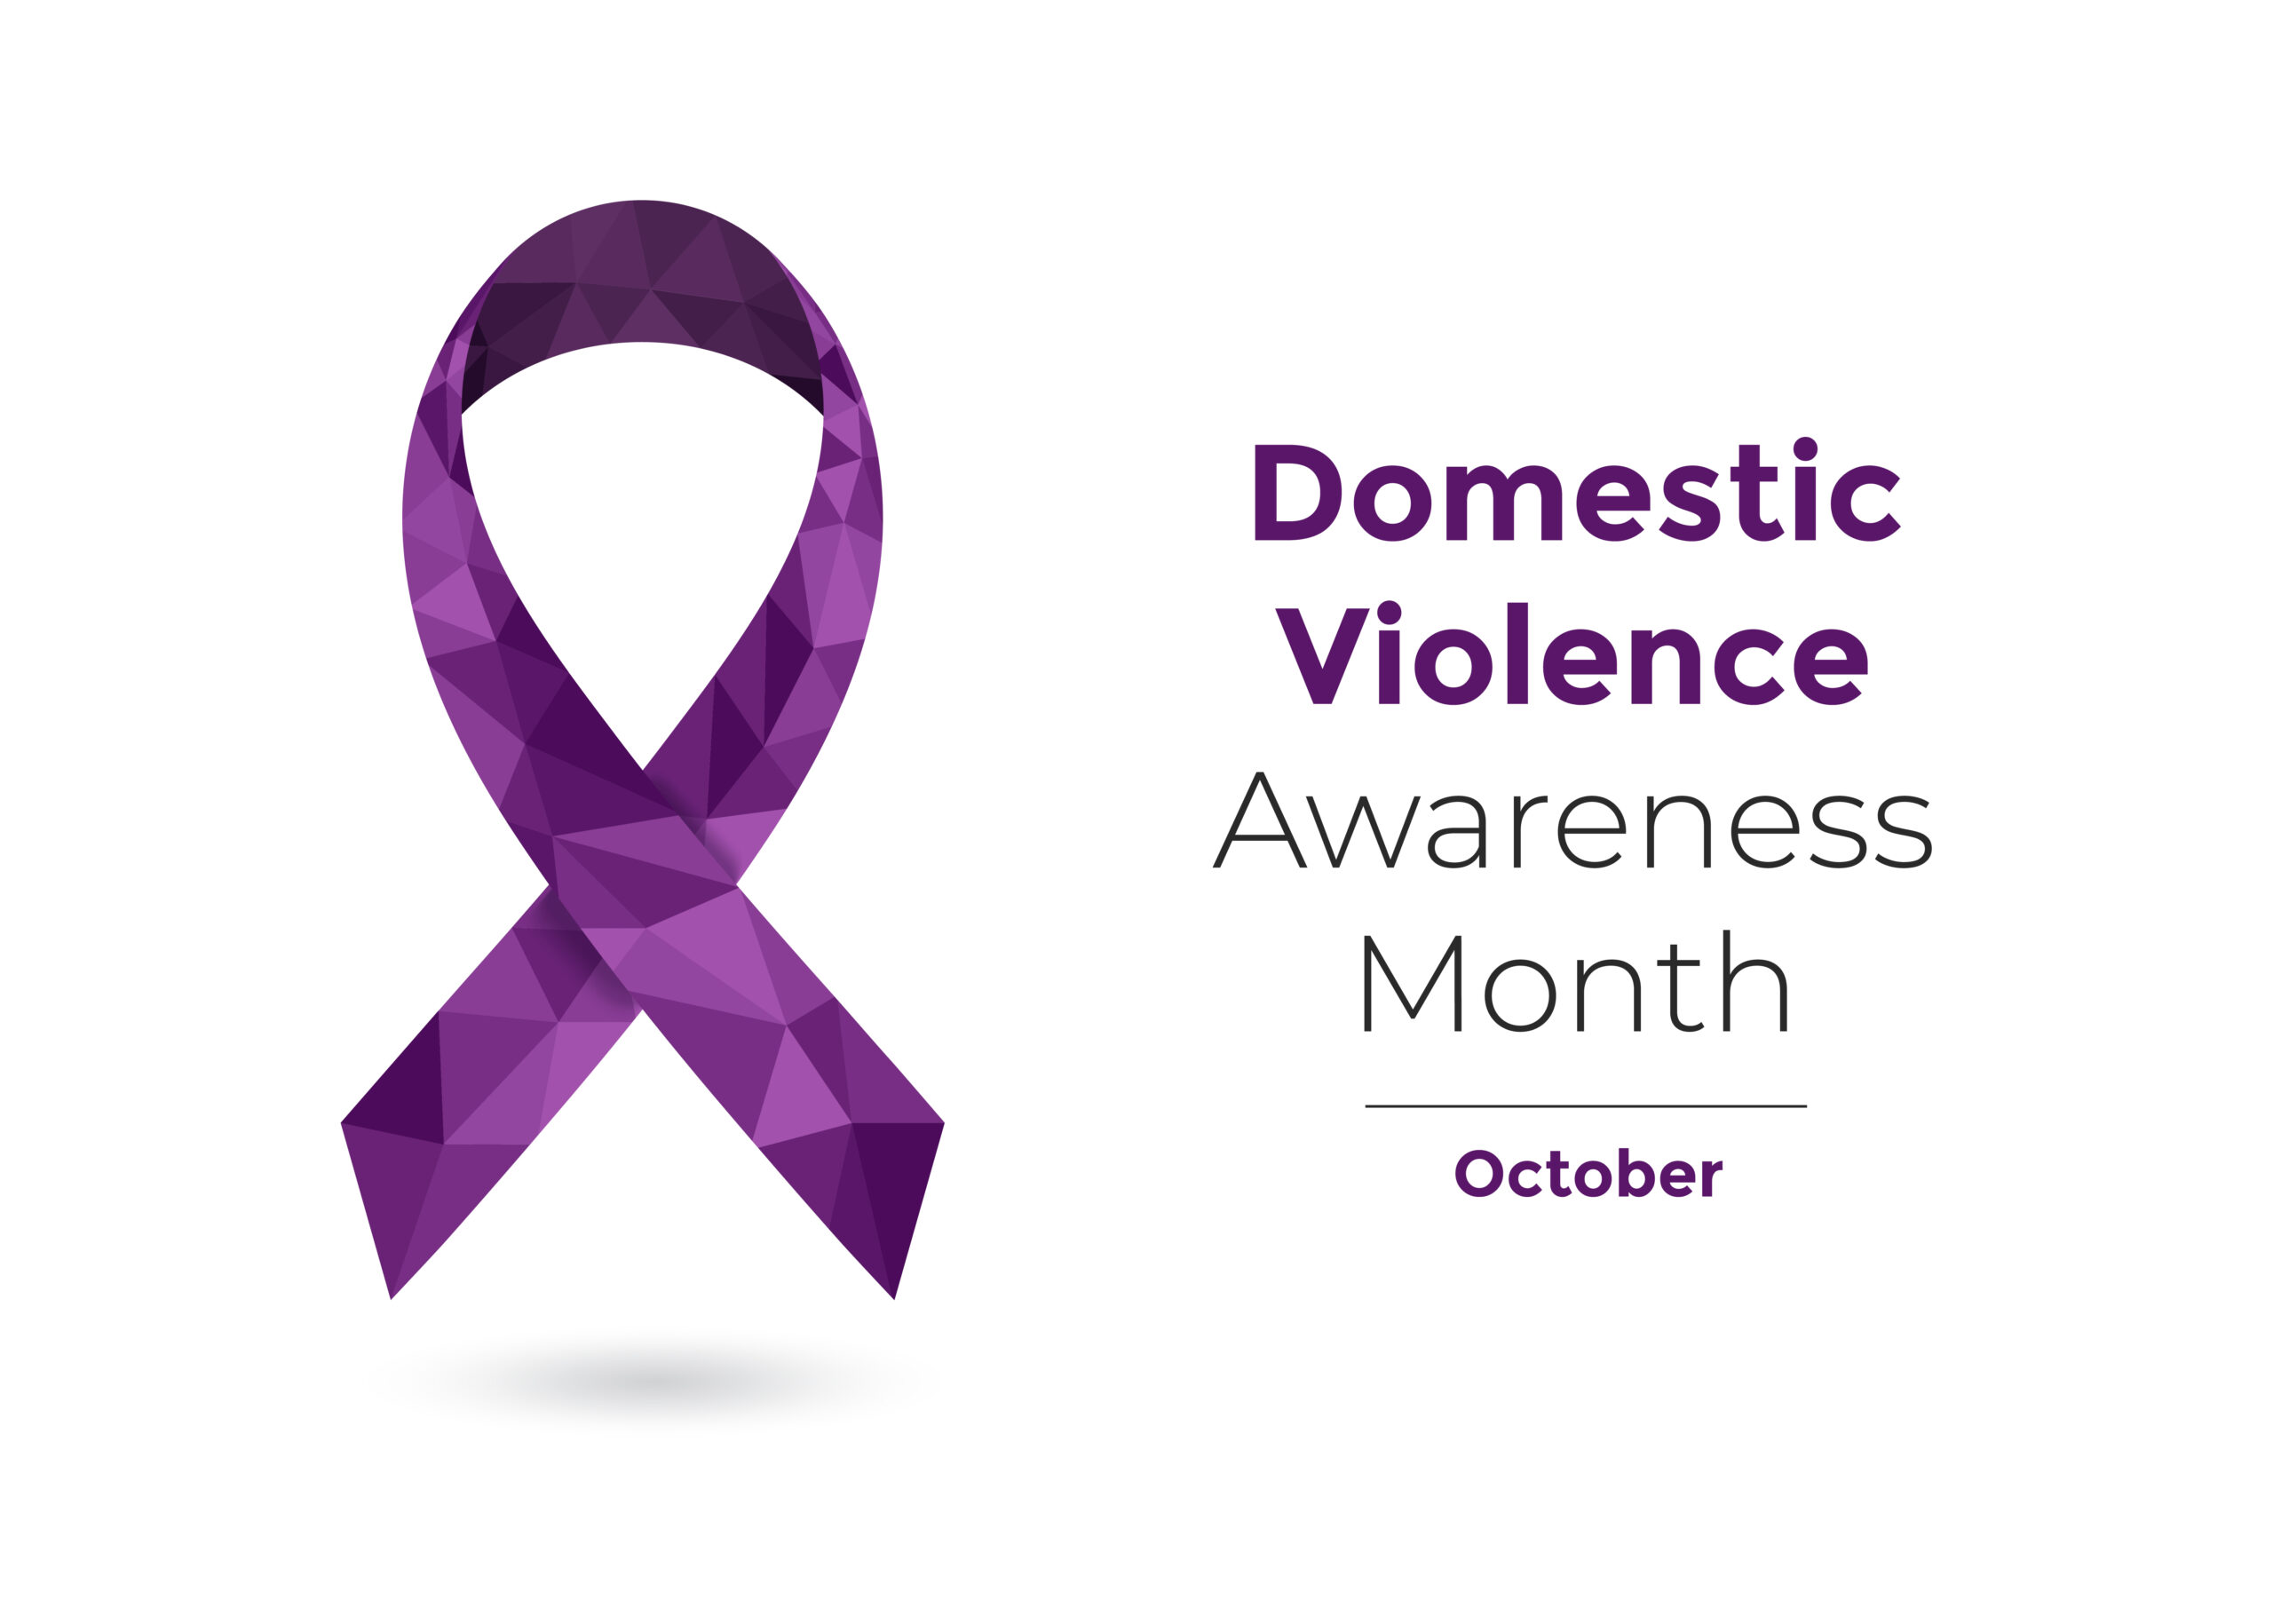 October is Domestic Violence Awareness Month - Community Coalition